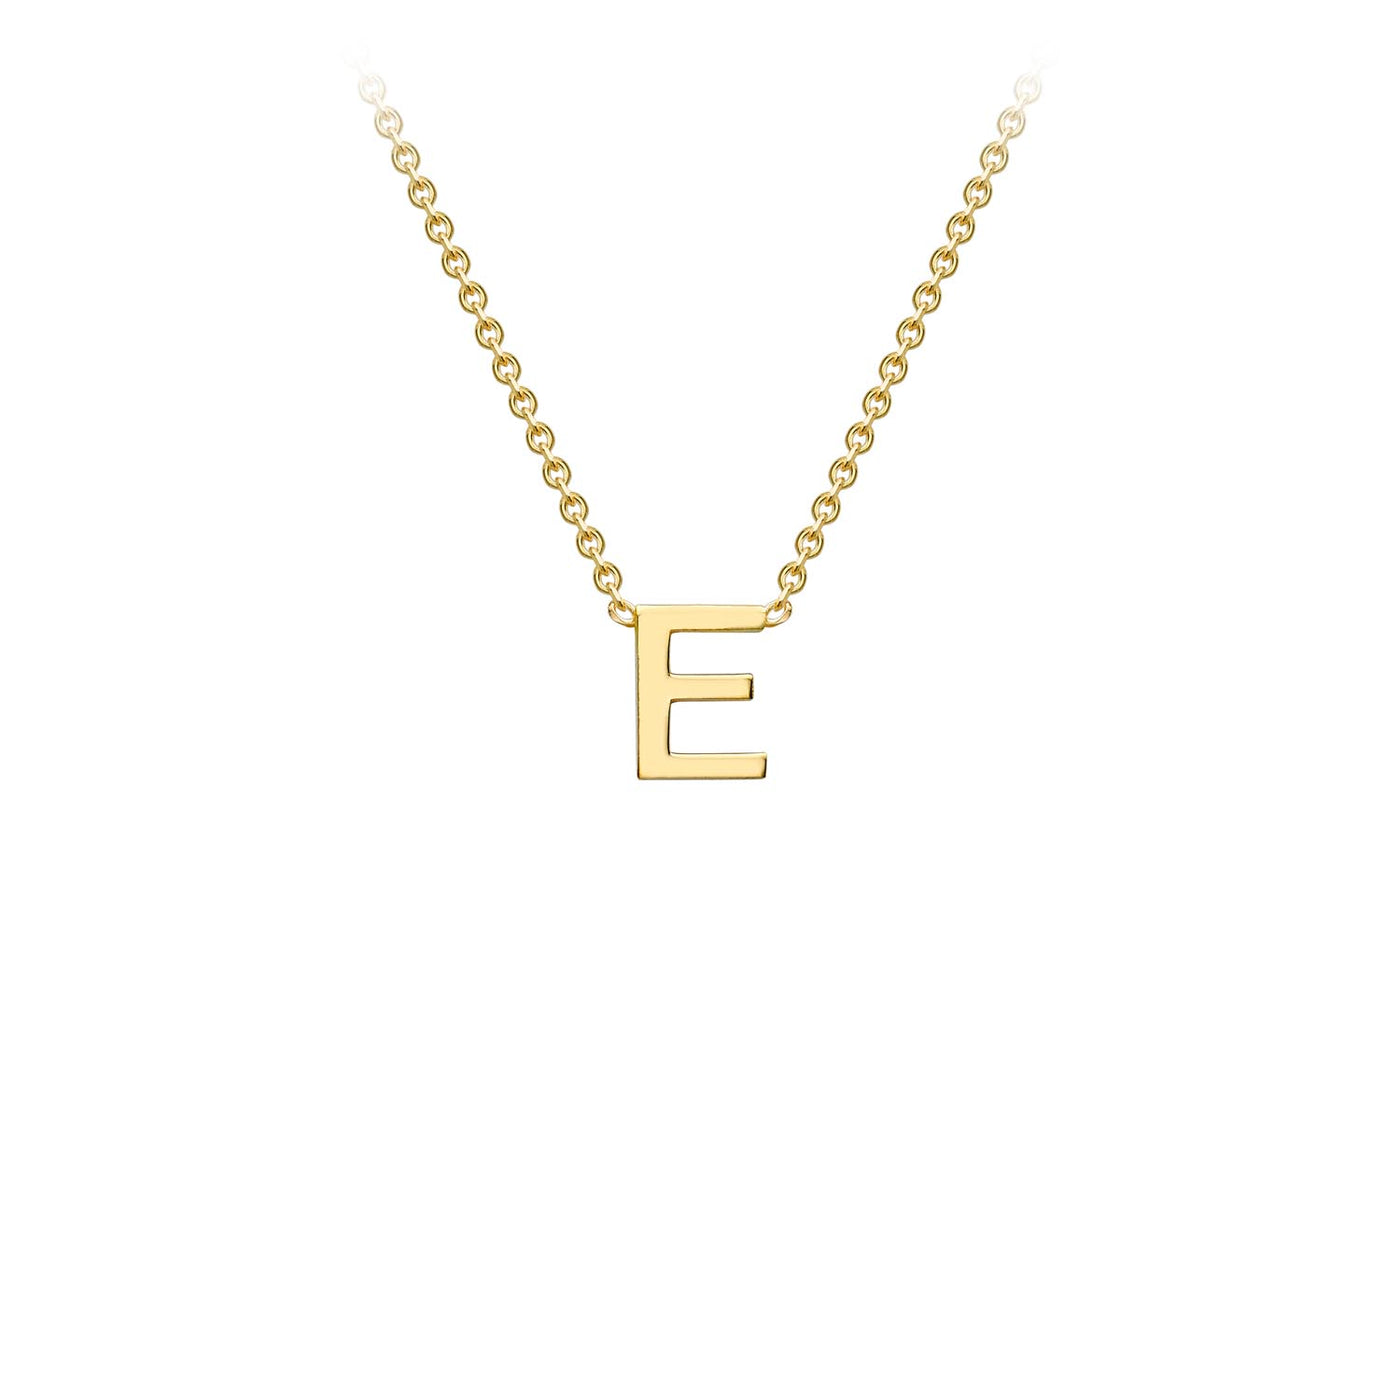 9ct Yellow Gold Petite Initial E Necklace